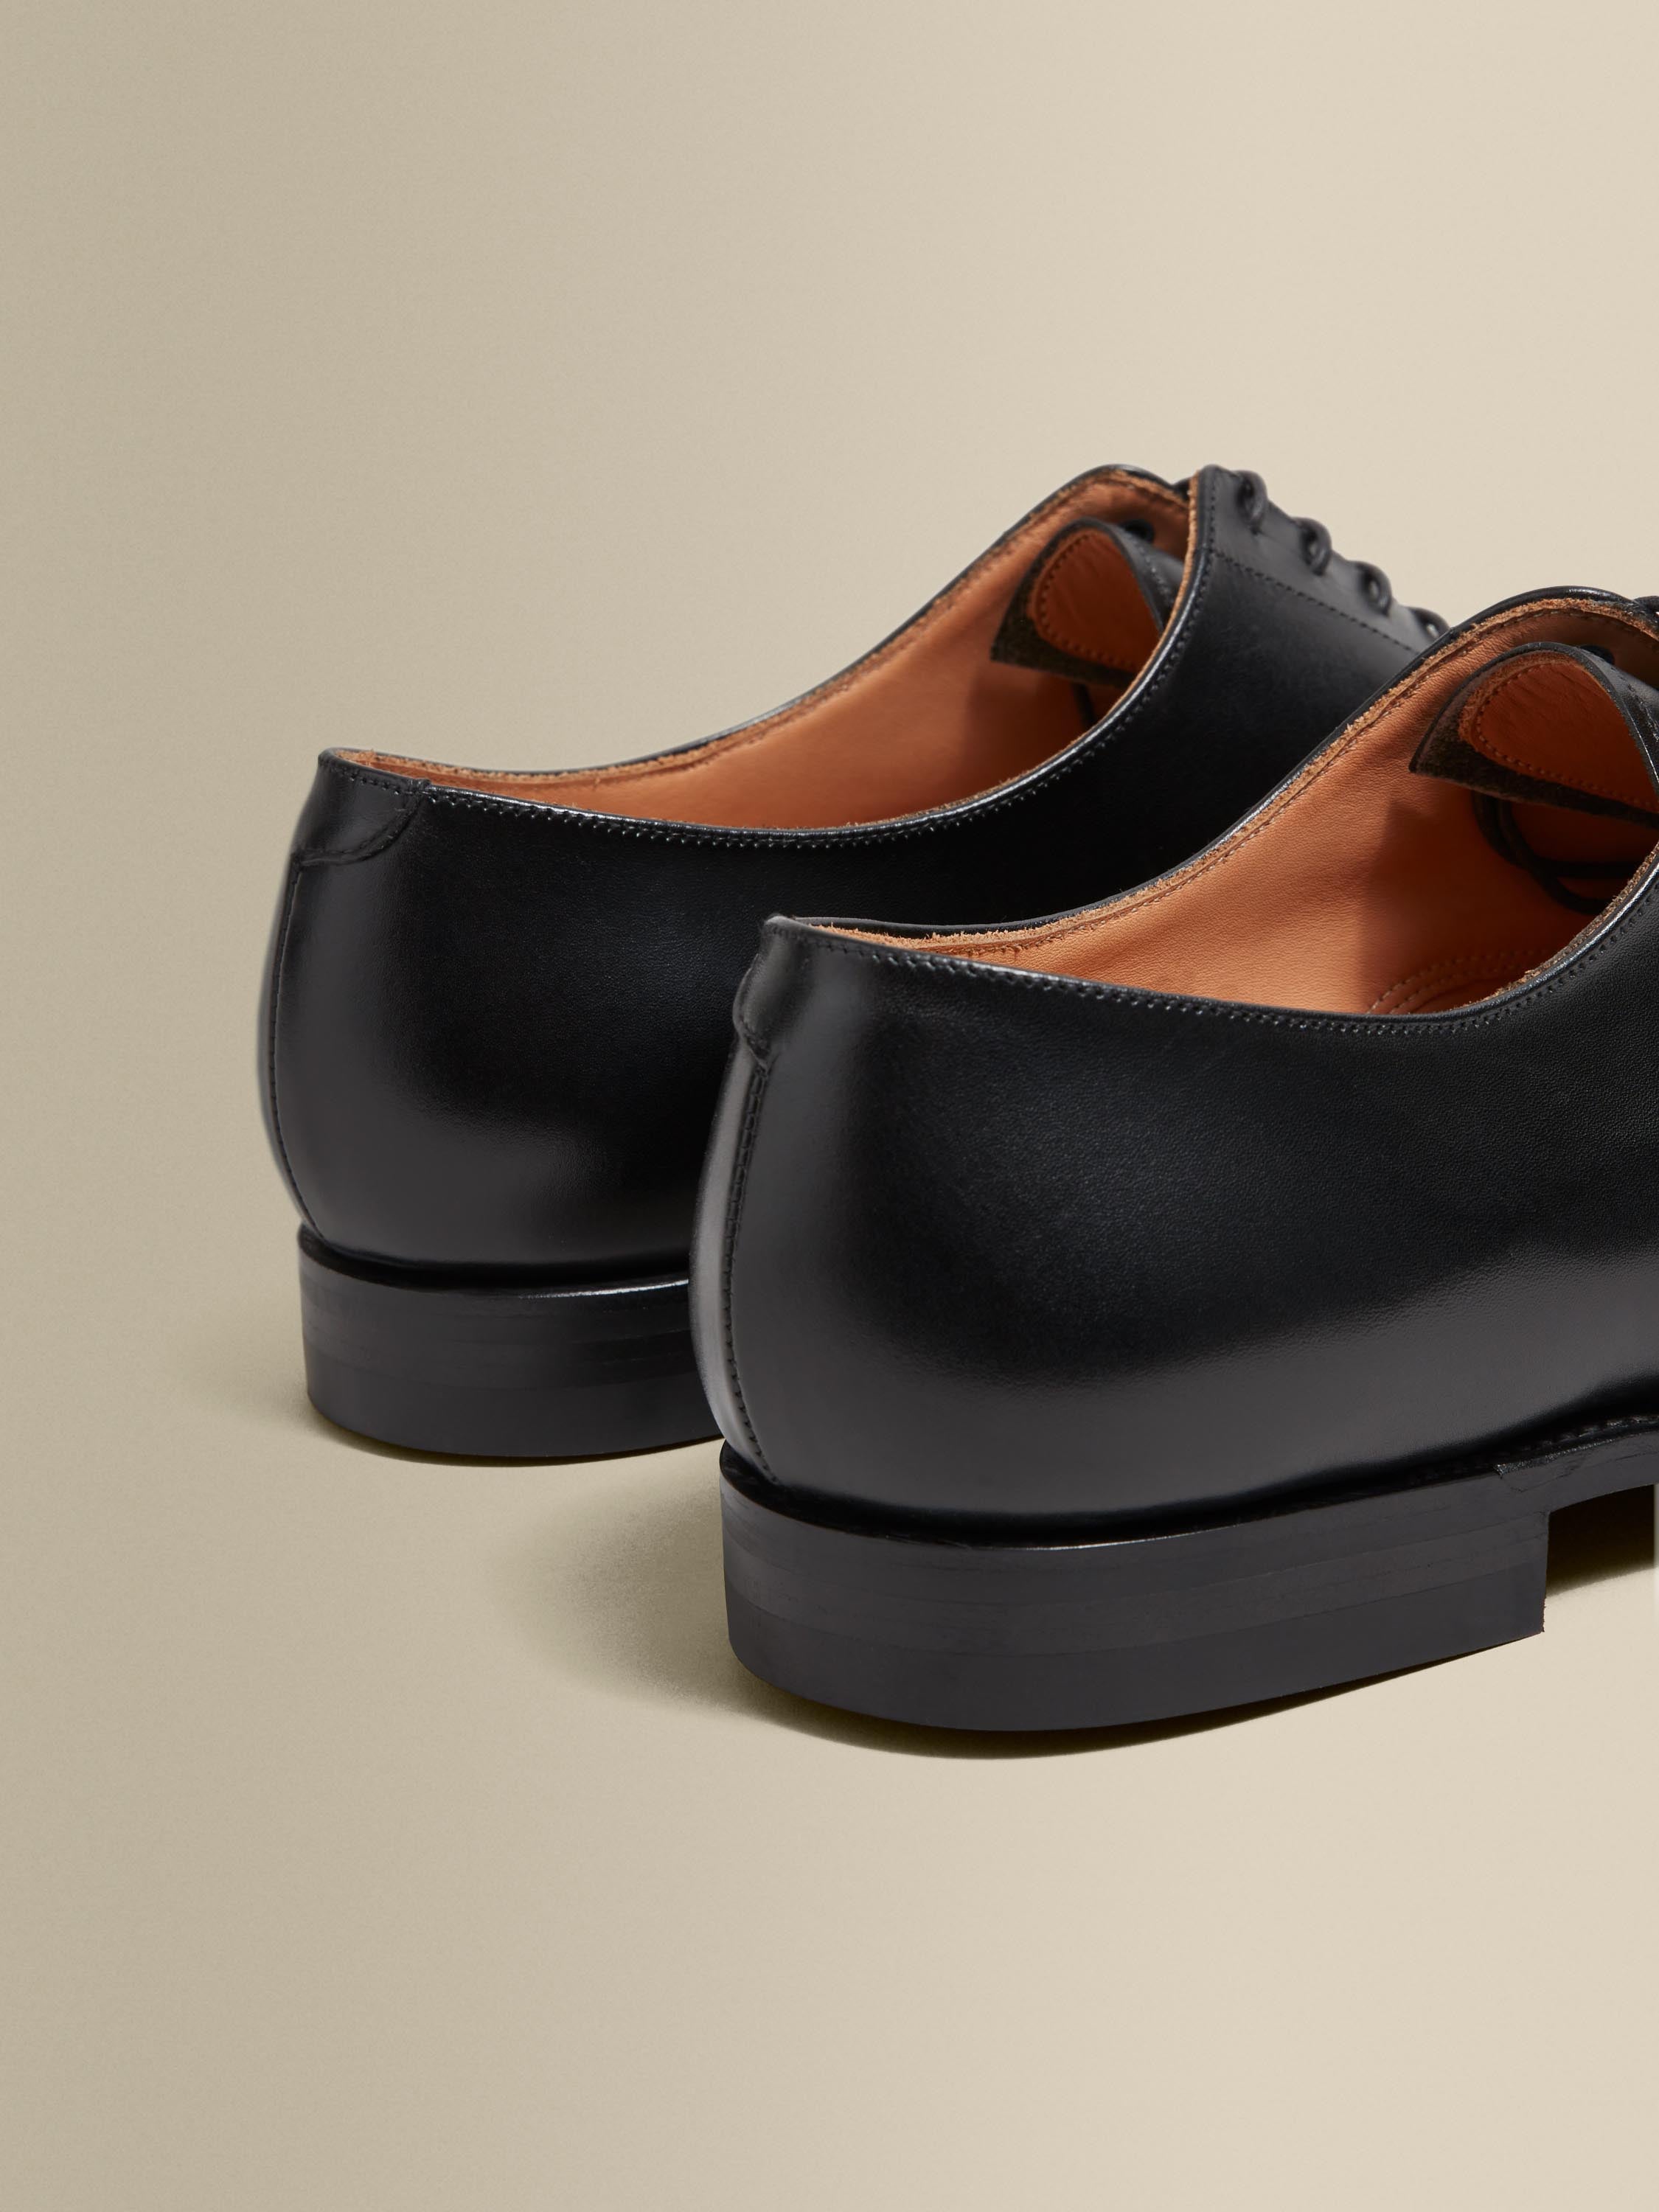 Calf Leather Oxford Shoes Black Product Image Heel